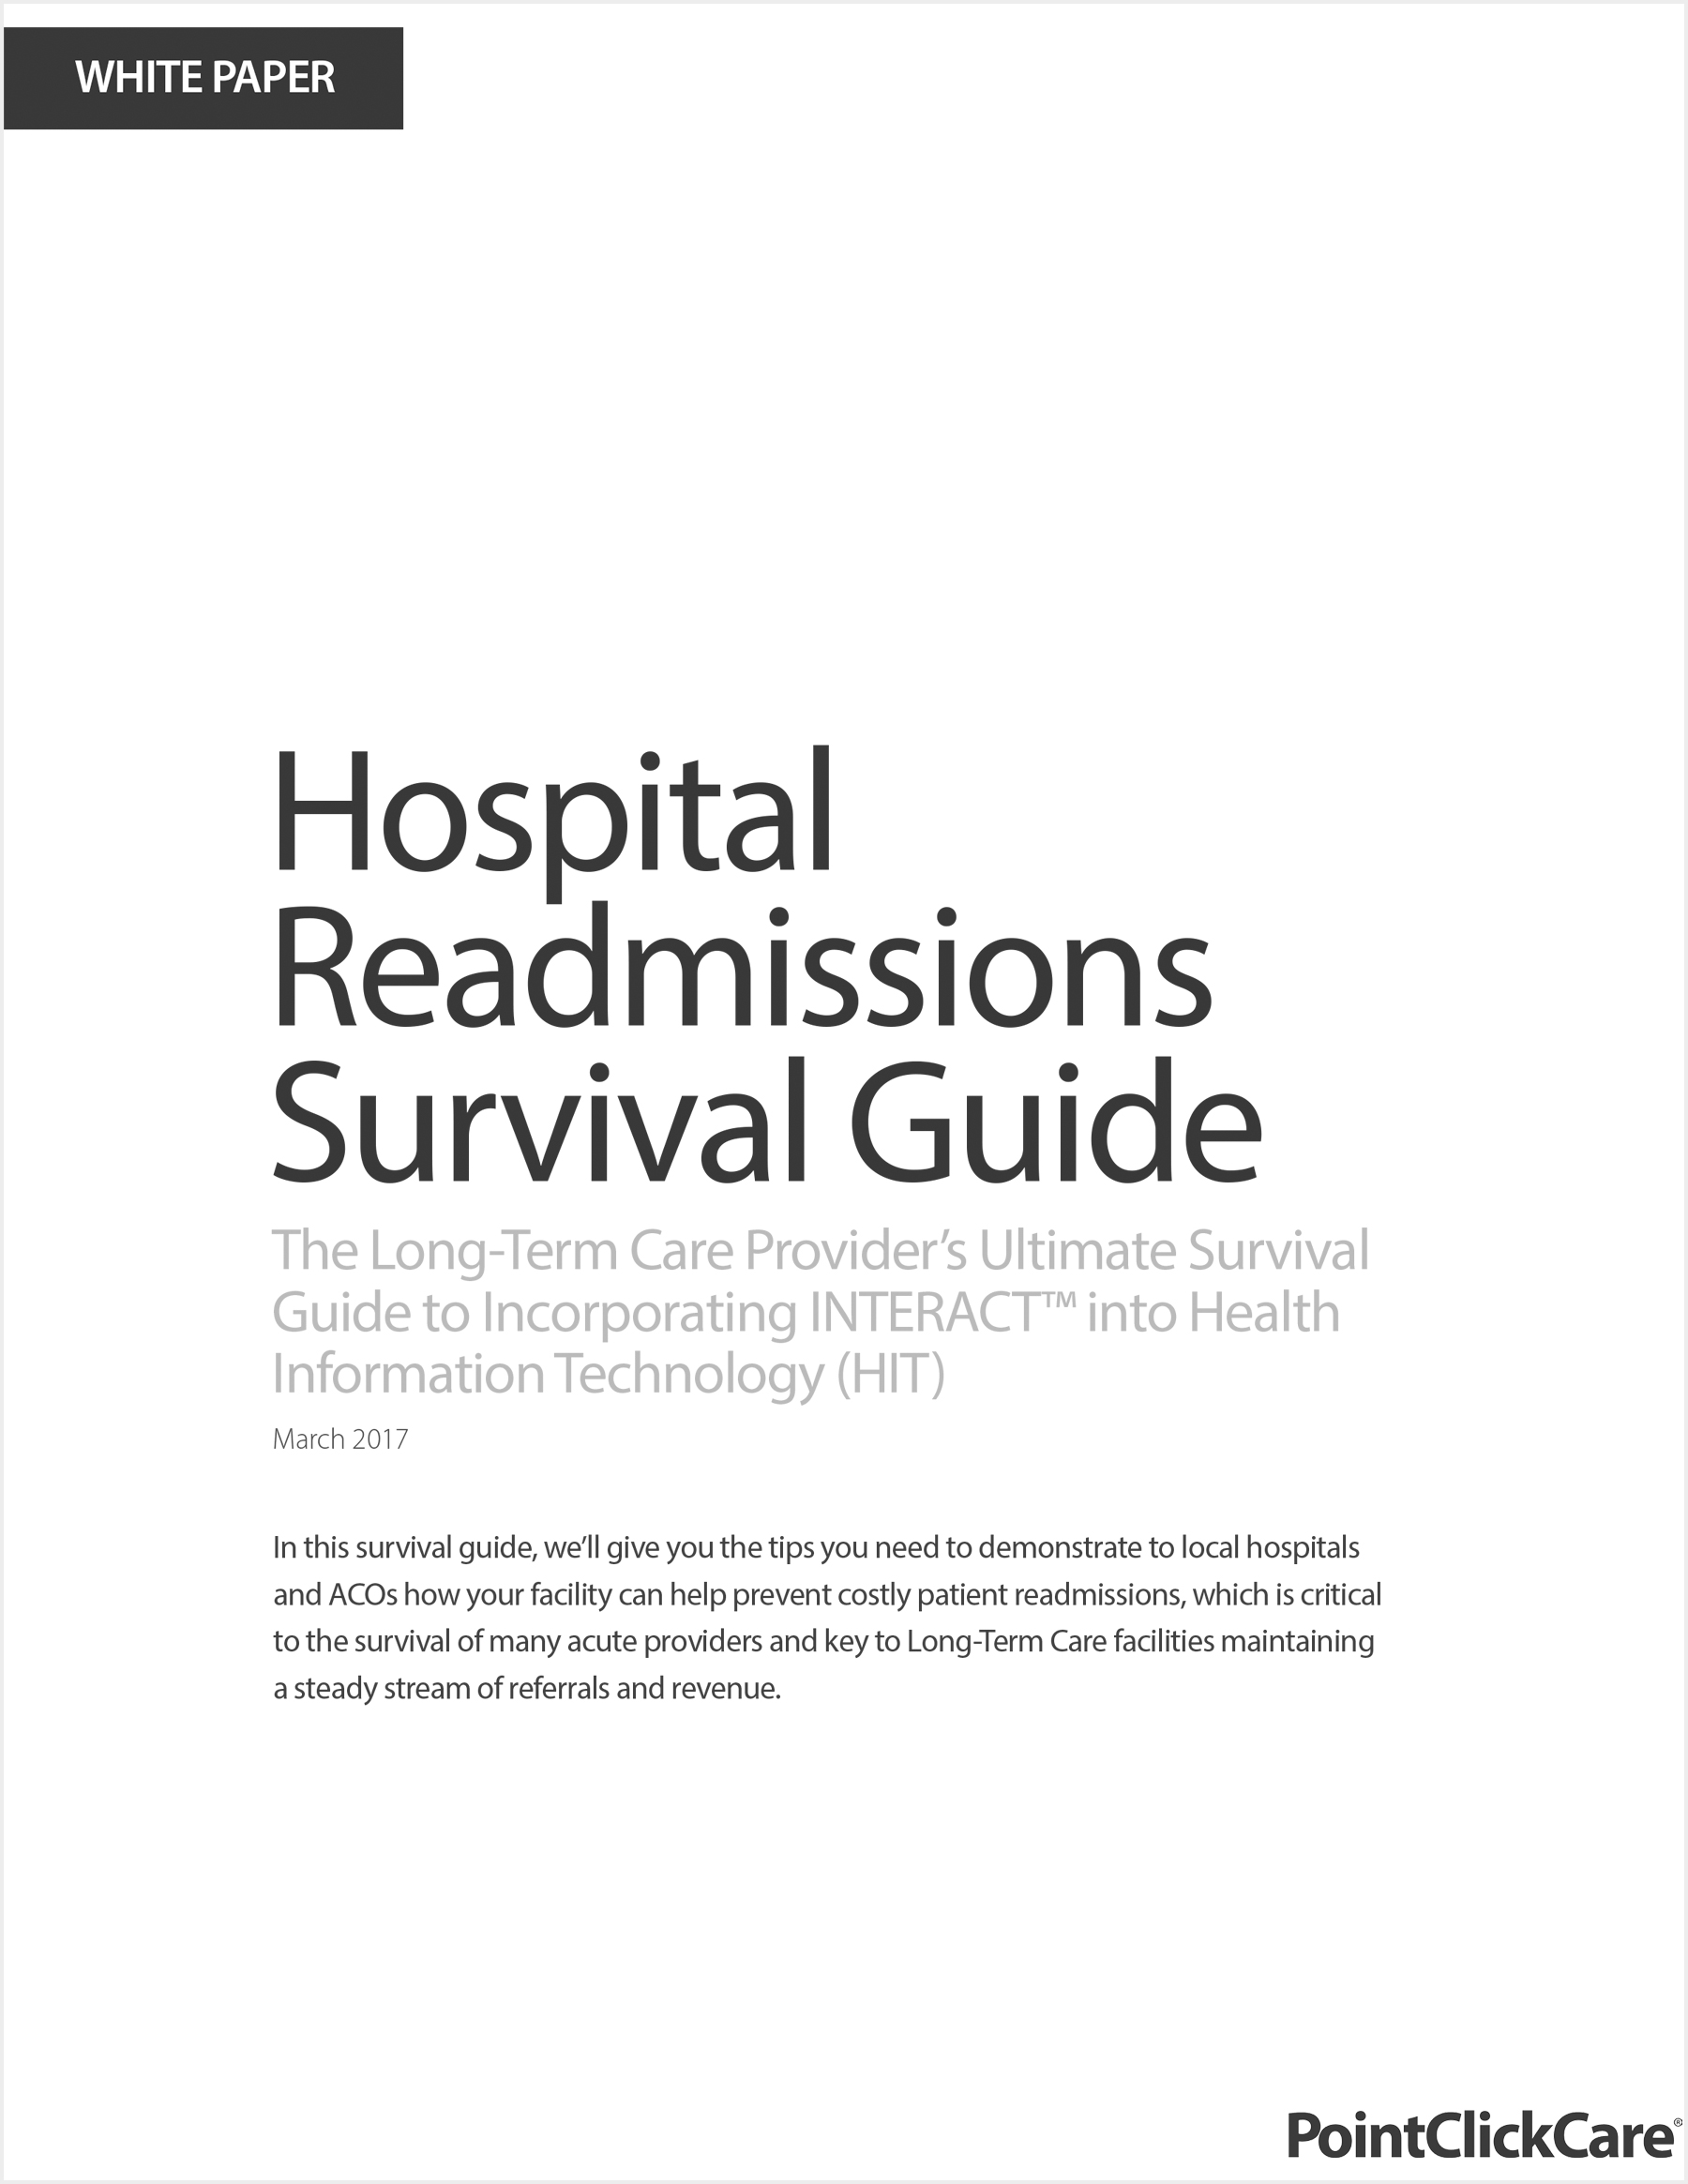 hospital-readmissions-survival-guide-cover-pg